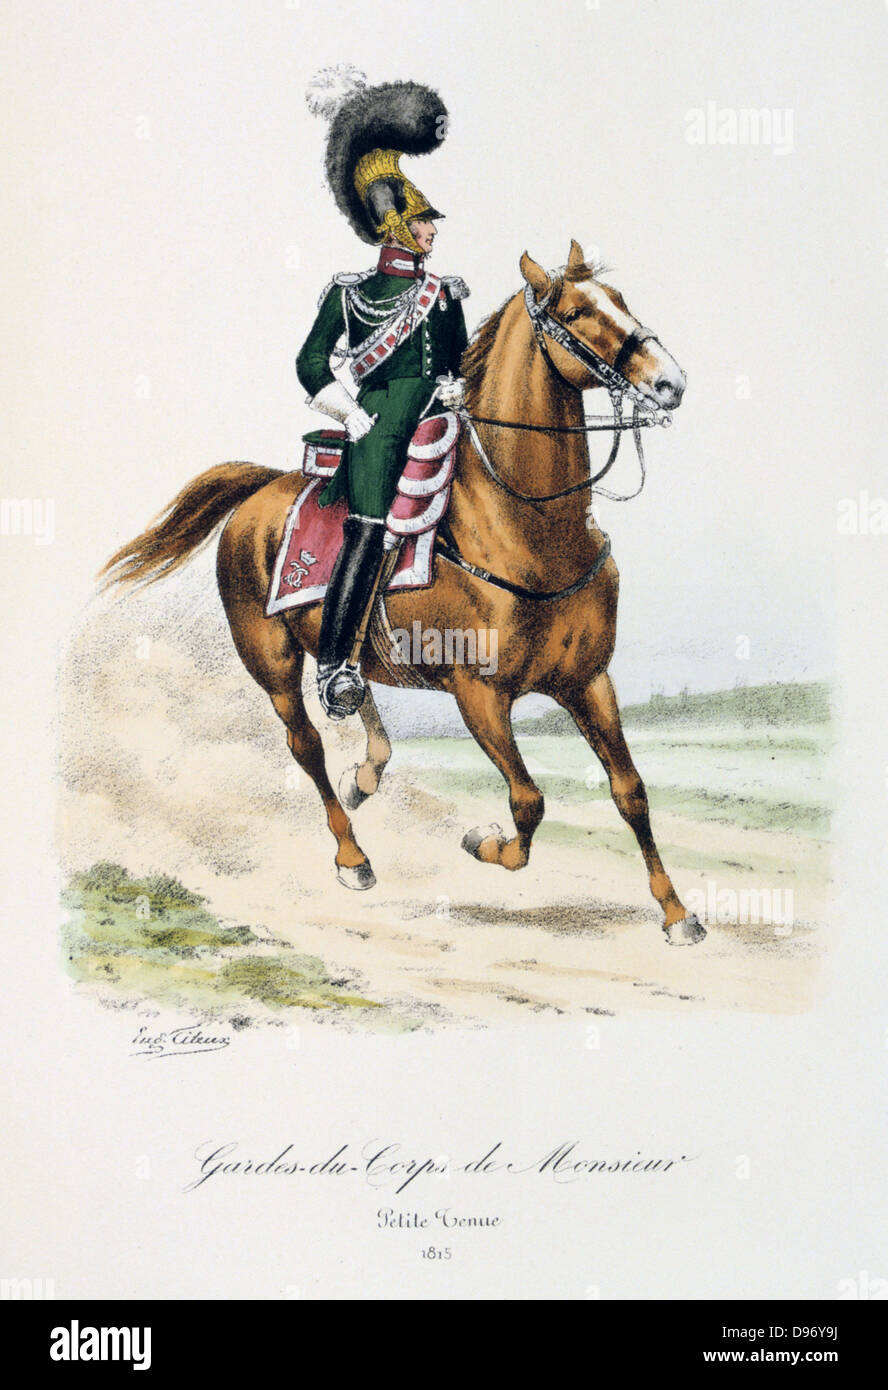 Mounted officerof the bodyguard of the heir to the throne. From 'Histoire de la maison militaire du Roi de 1814 a 1830' by Eugene Titeux, Paris, 1890. Stock Photo